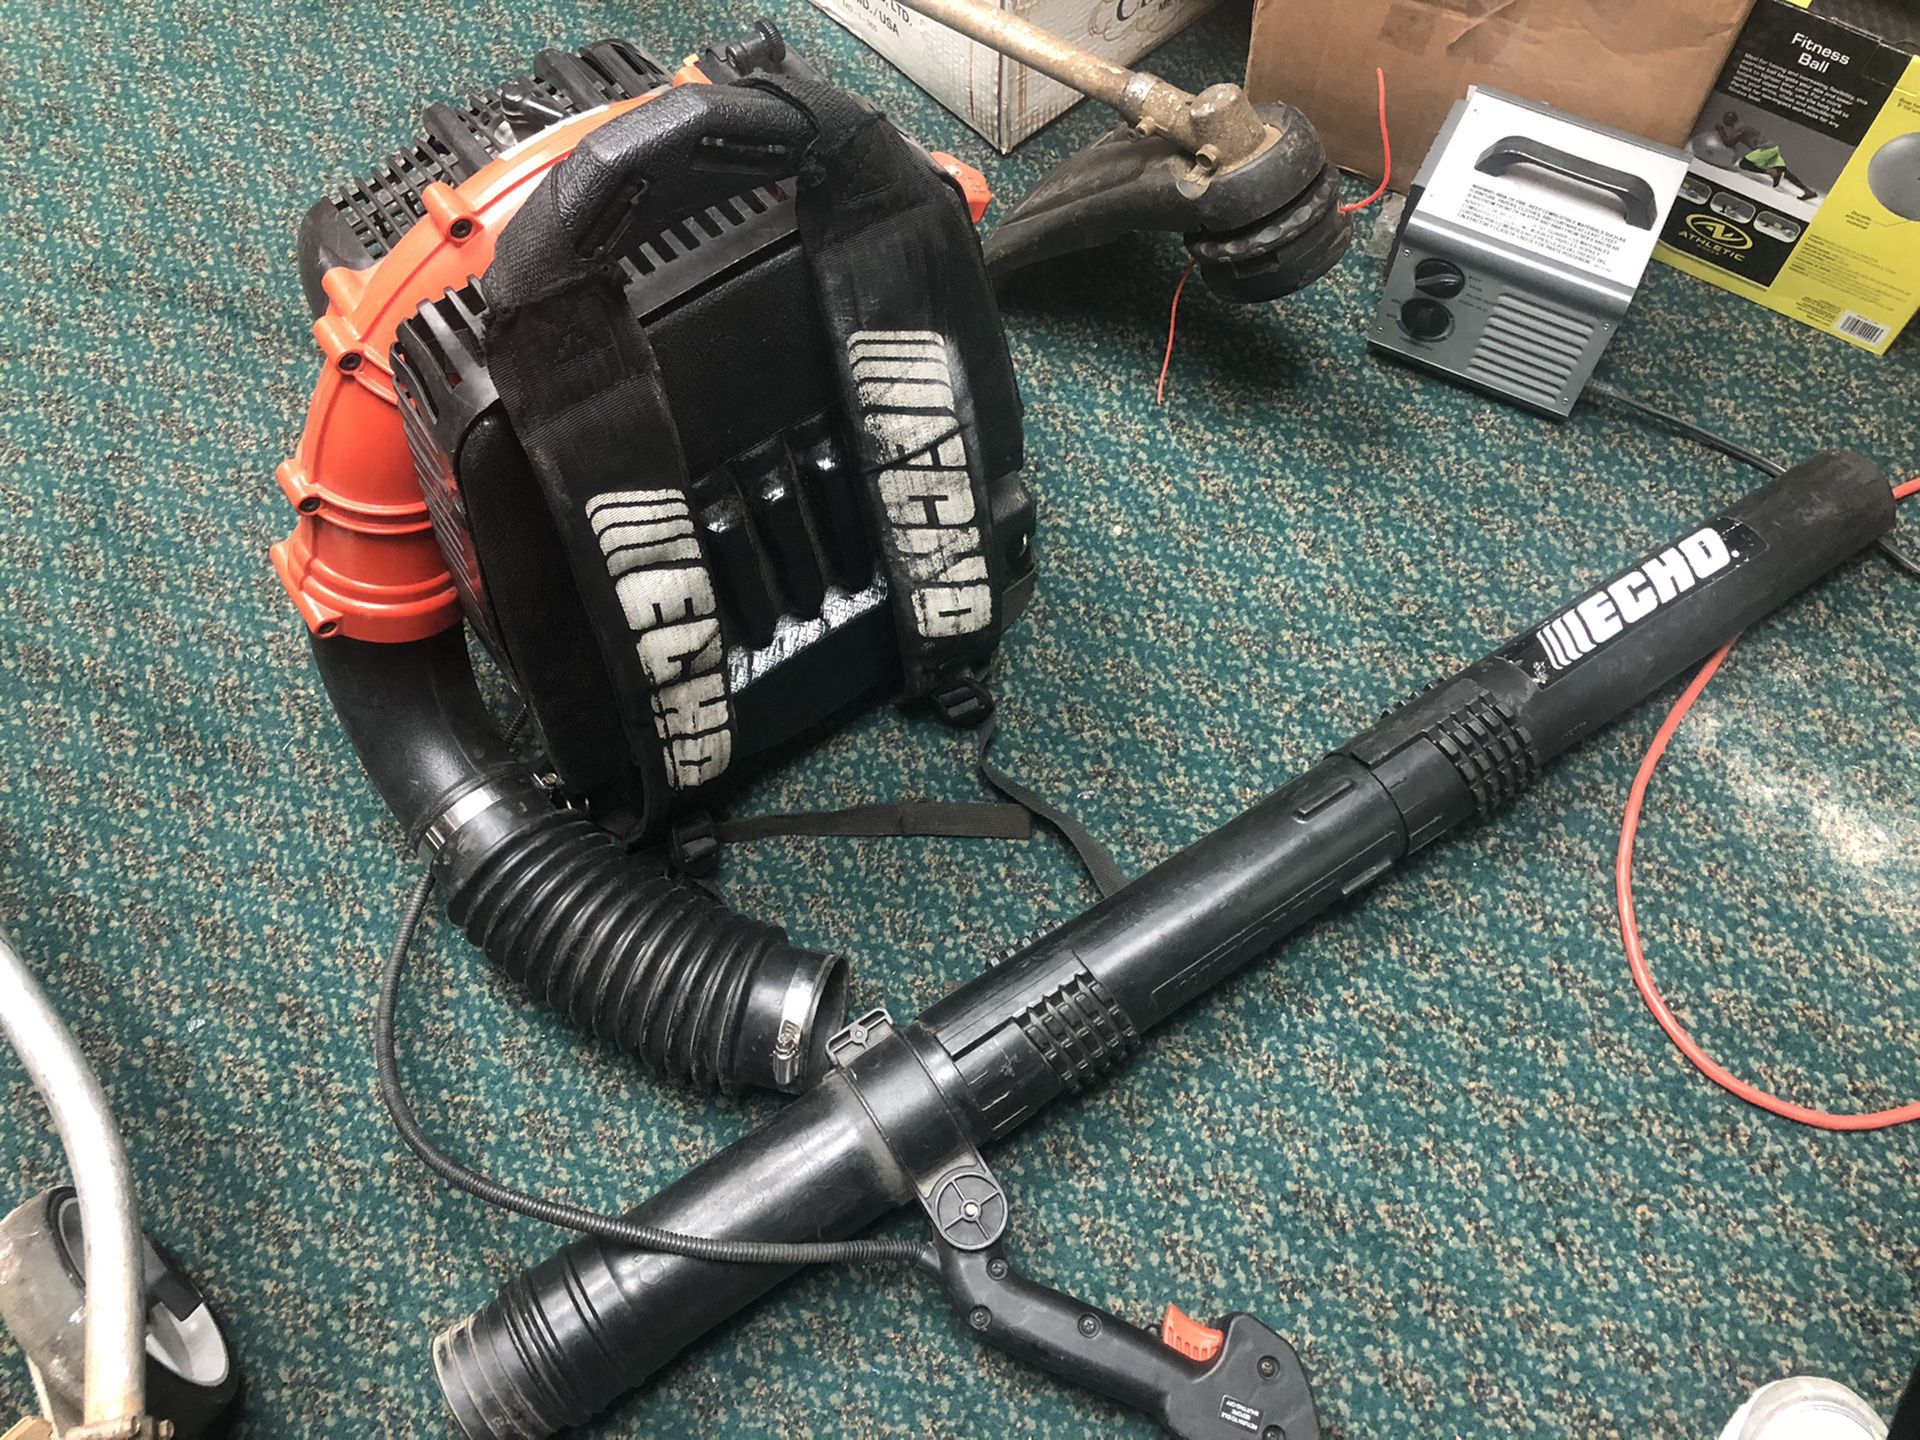 Blower, Tools-Power ECHO Backpack Blower PB500T .. Negotiable